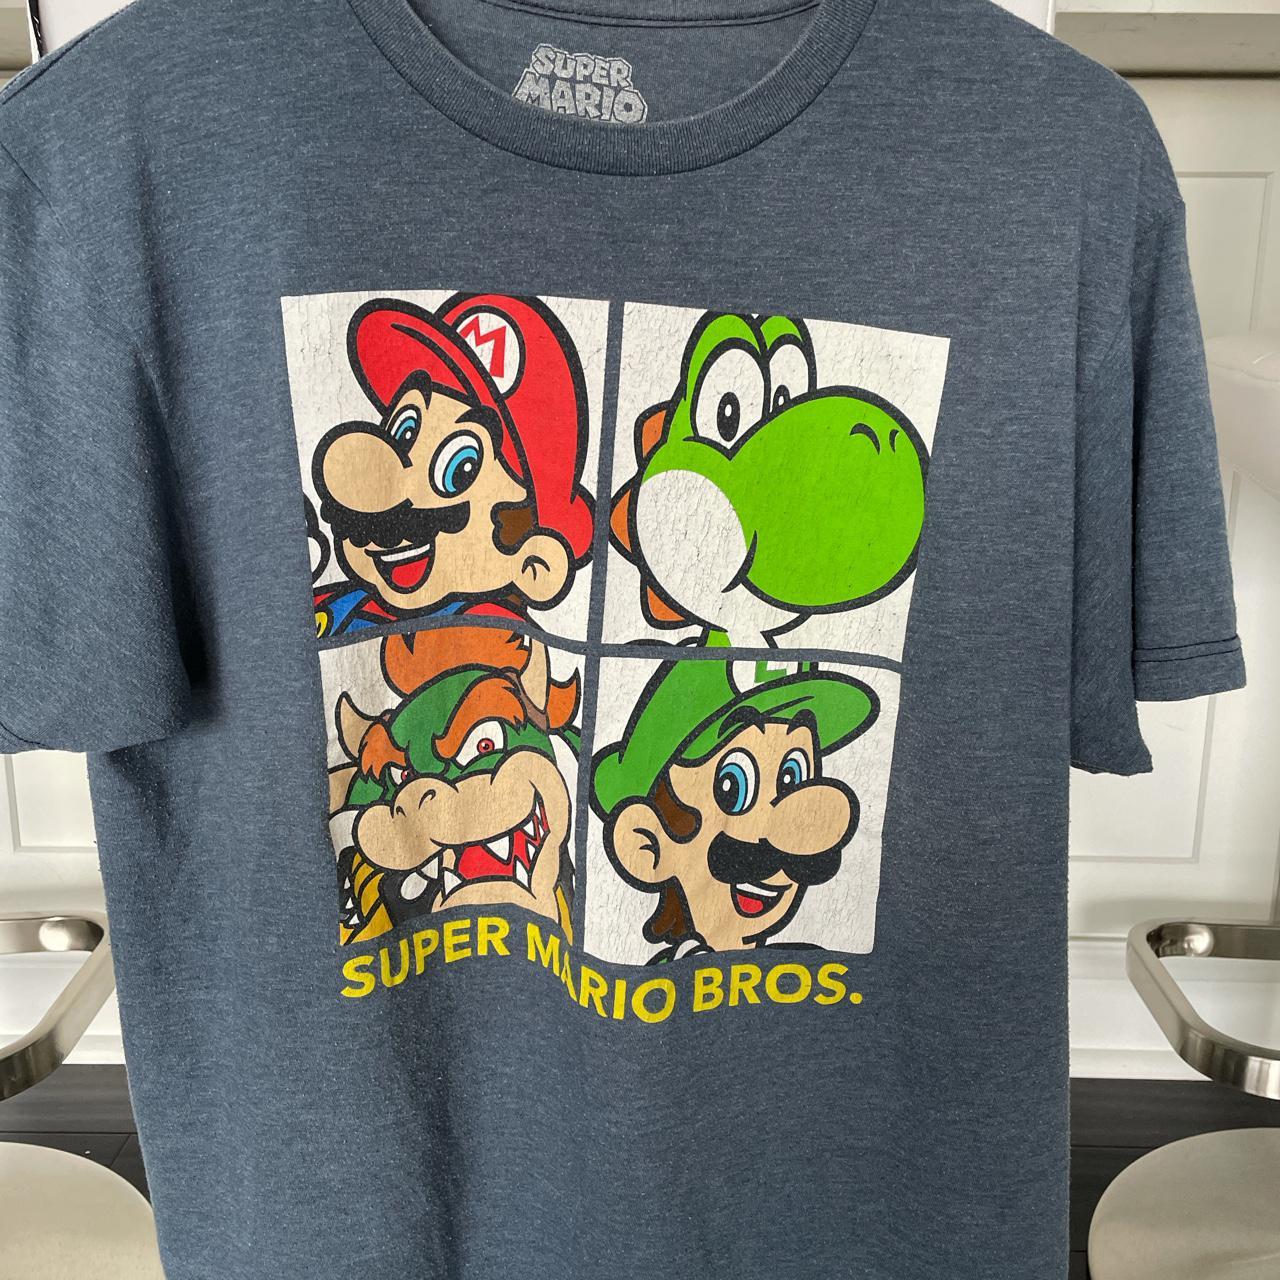 Authentic Super Mario Bros shirt from 2015. The... - Depop